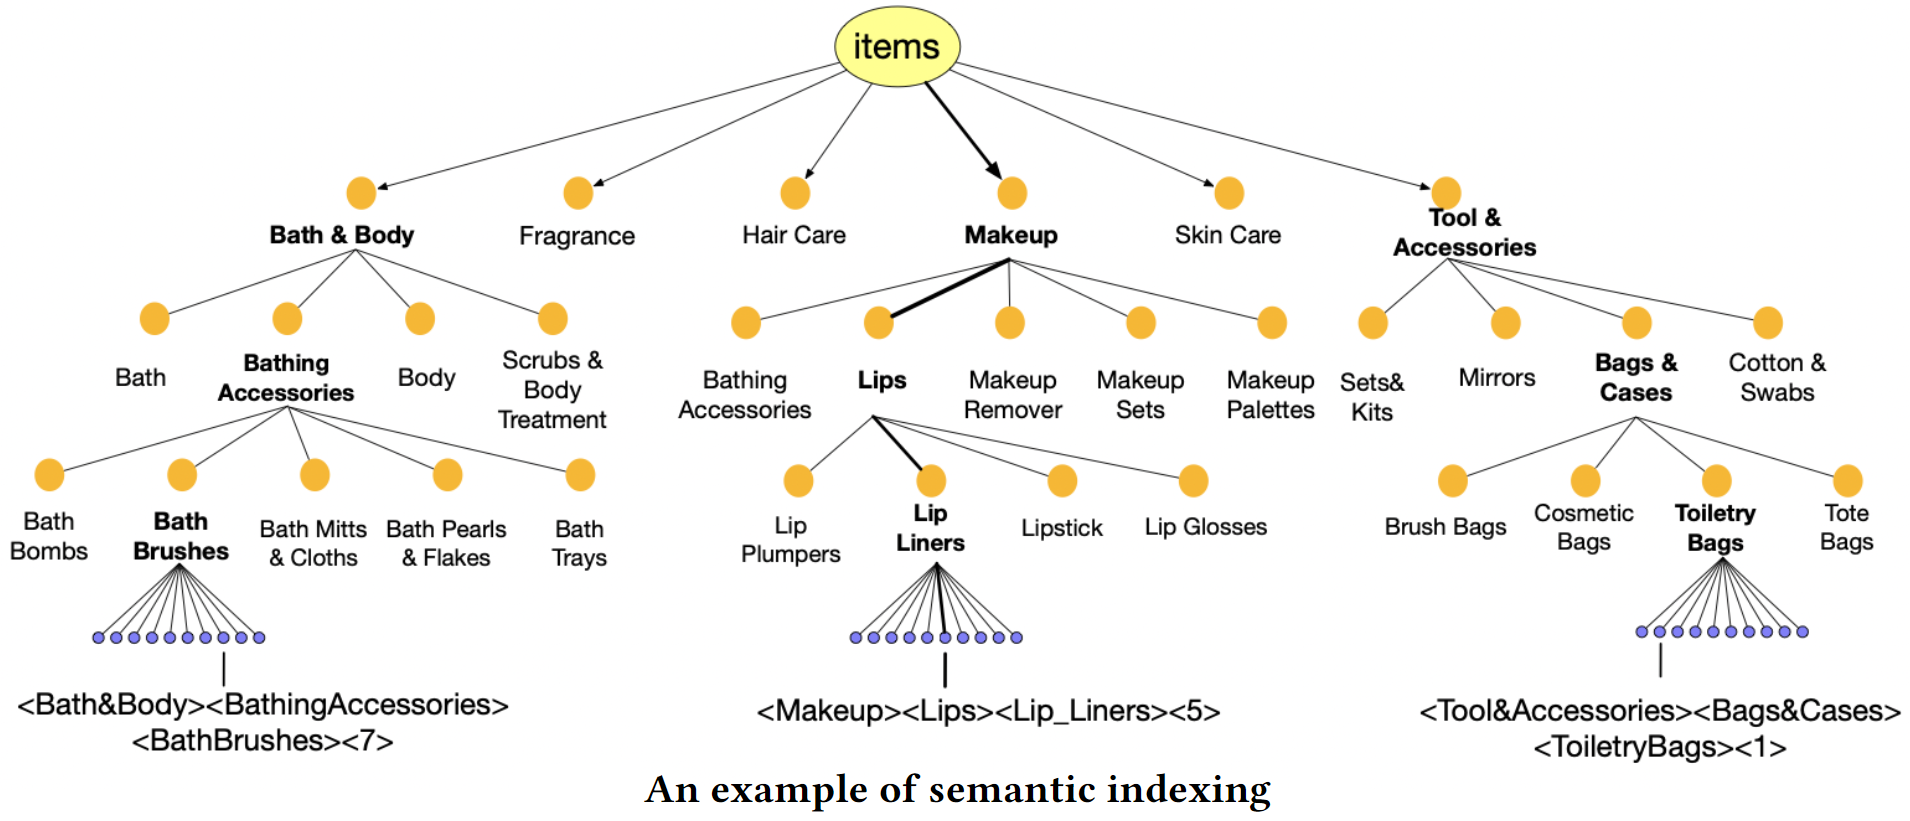 /img/posts/2023/llms-for-recsys-entity-representation/semantic_indexing.png